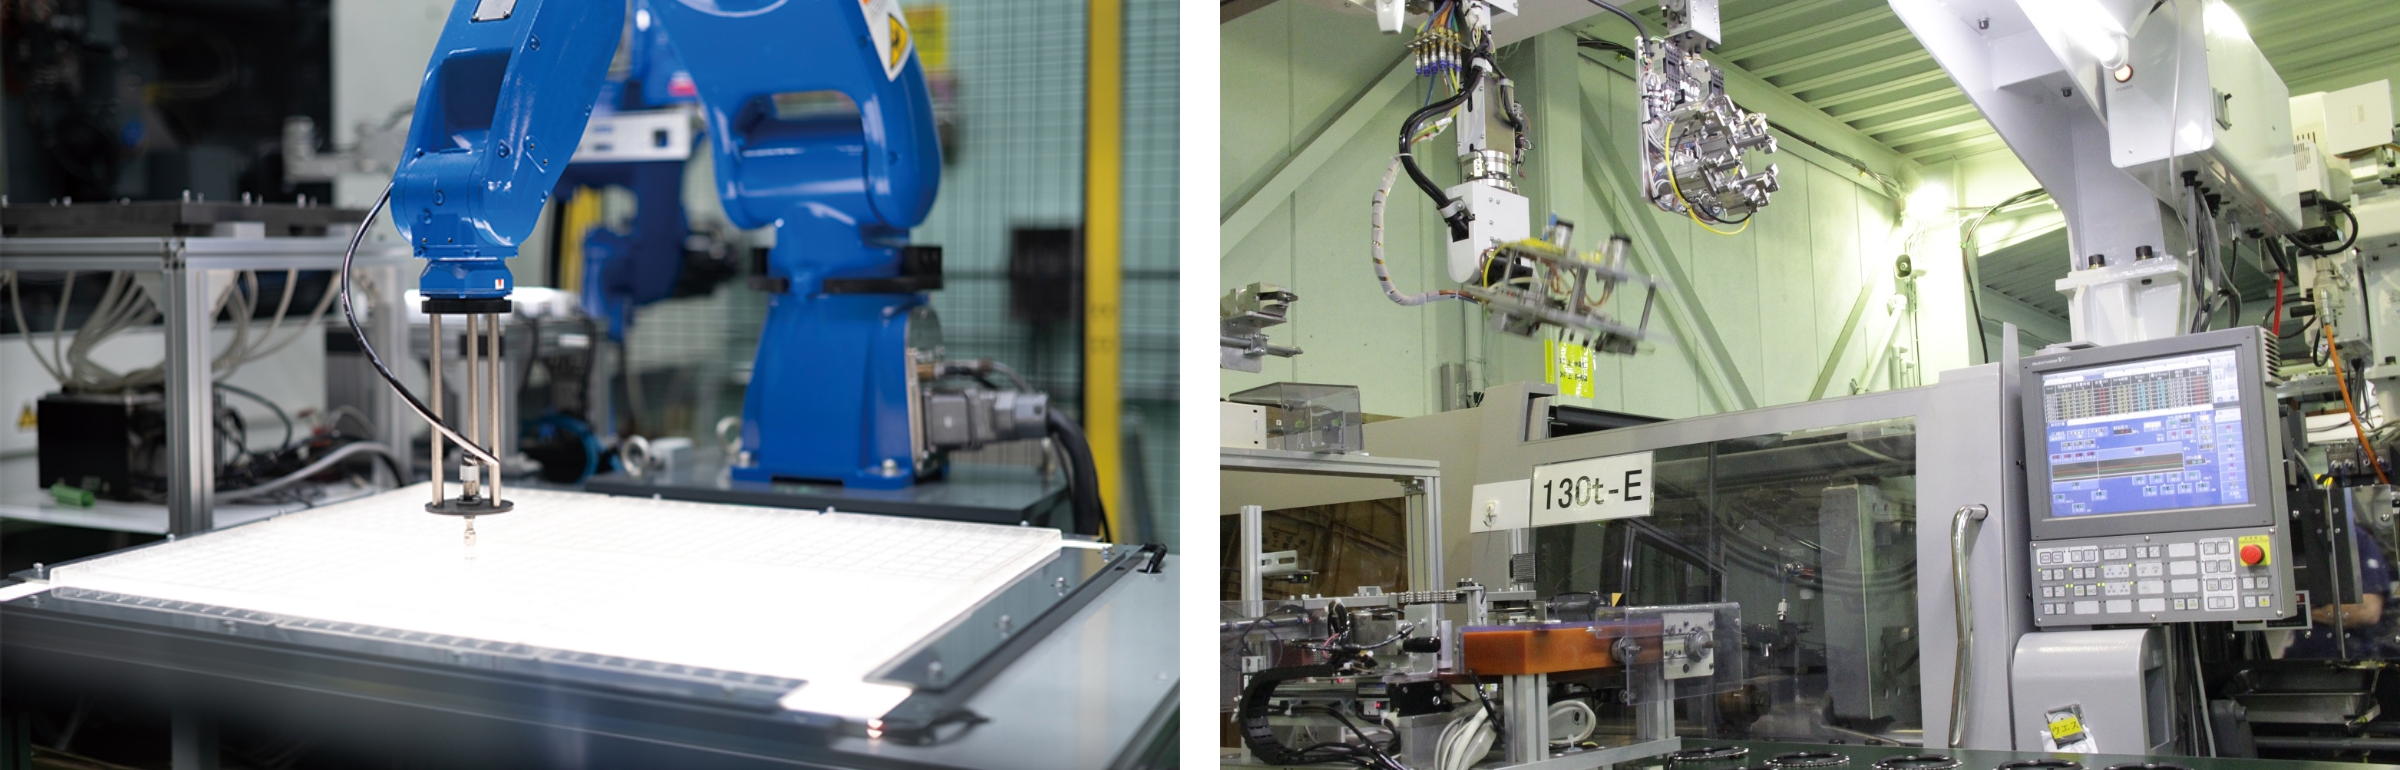 The initiatives our company is undertaking, such as the 'automation of production lines,' '24-hour unmanned production capabilities,' and 'mechanization through the introduction of robots,' offer numerous advantages and possibilities.